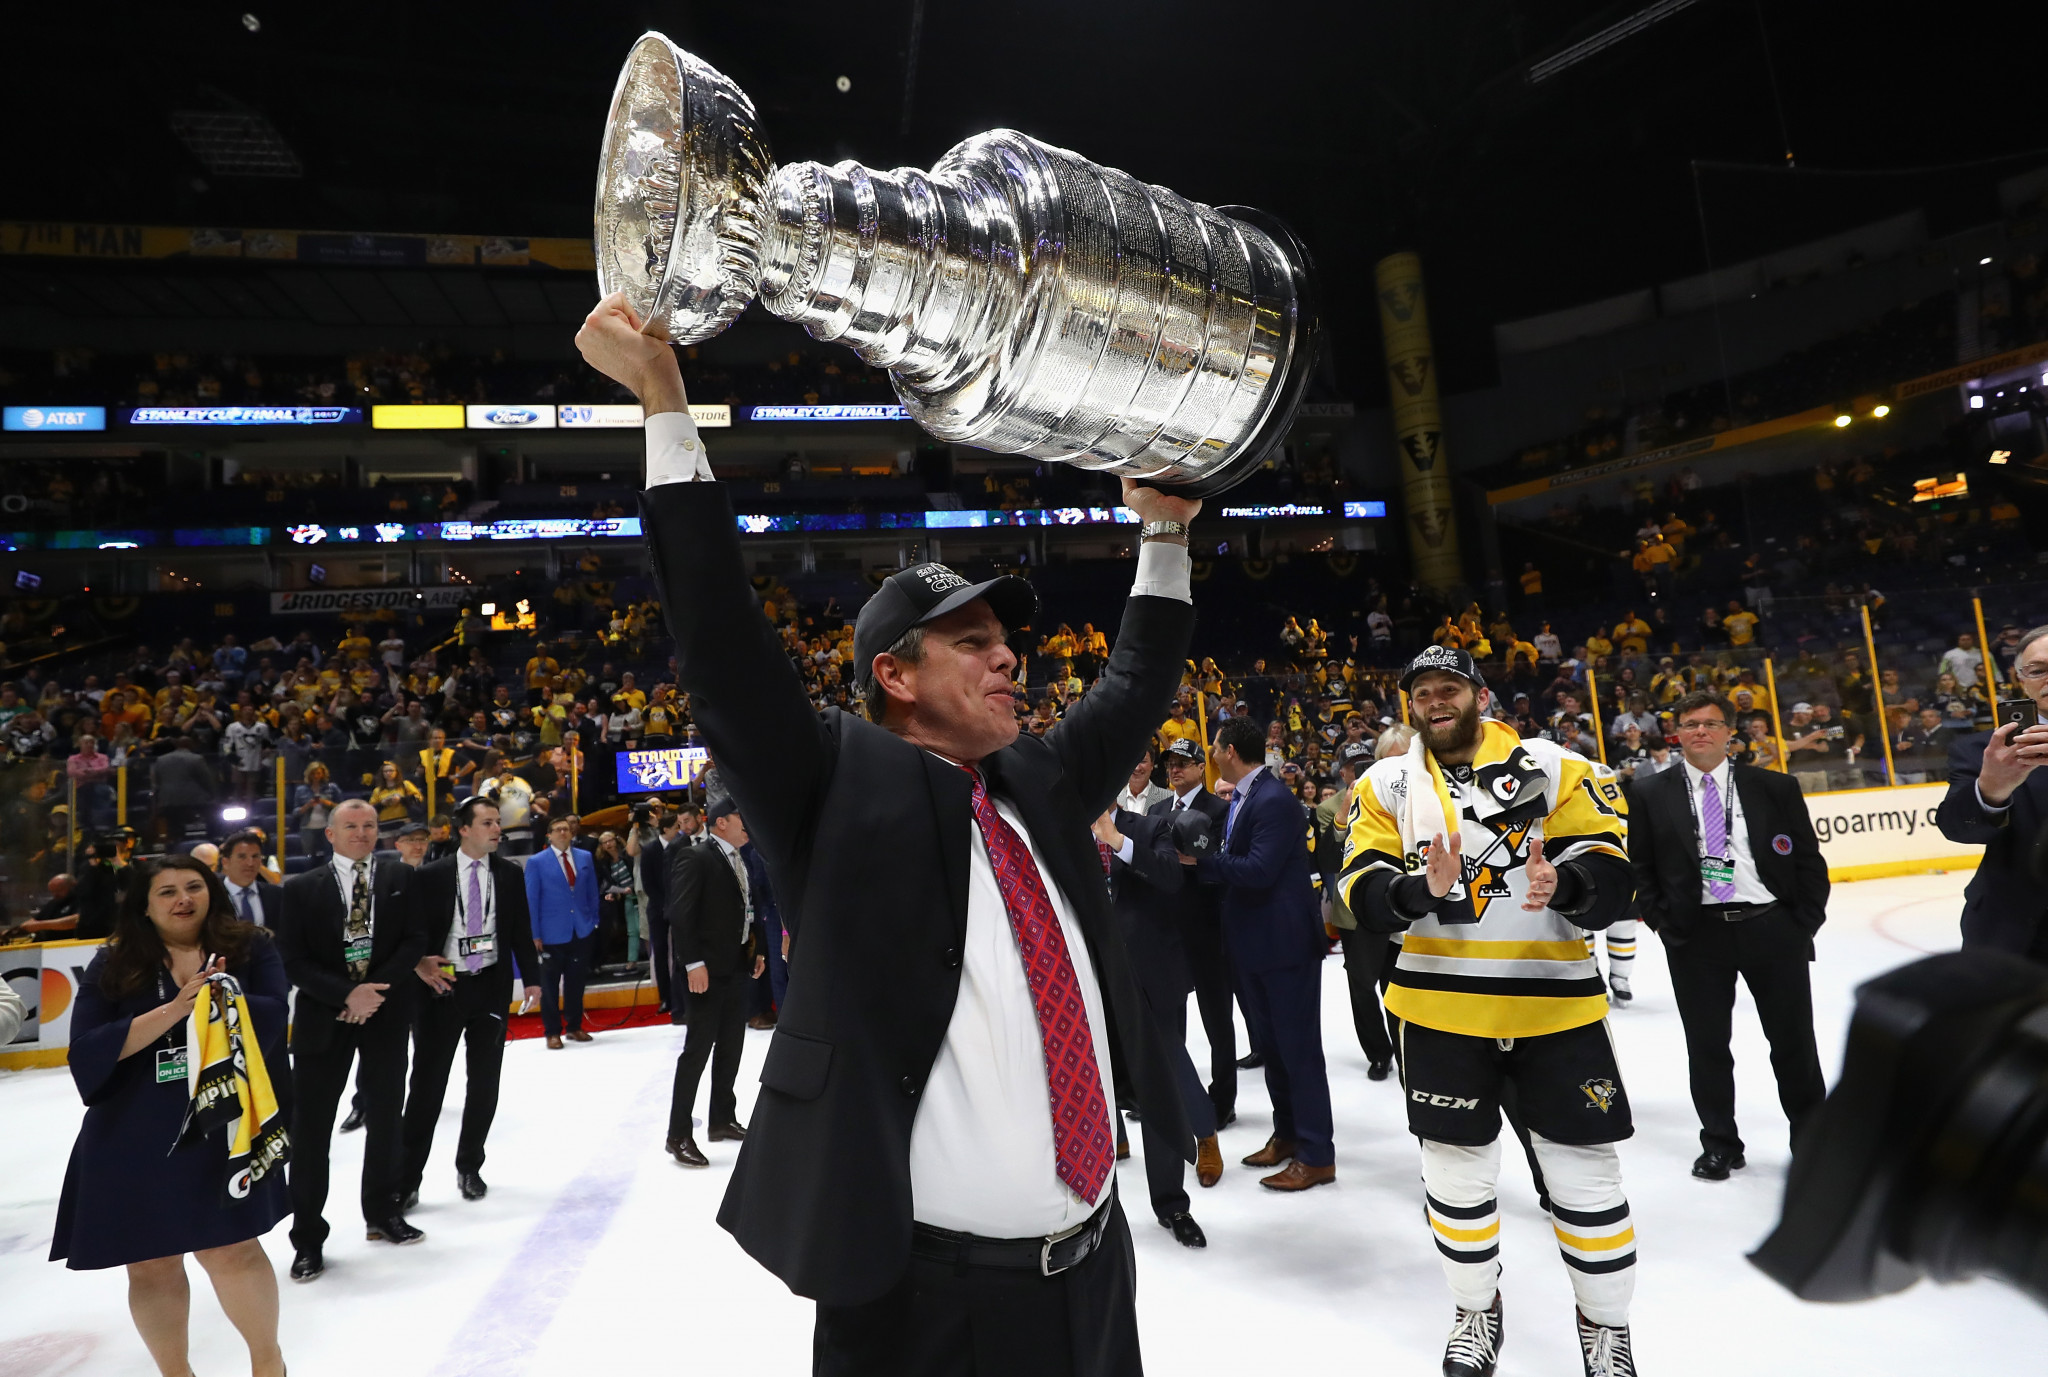 Pittsburgh Penguins head coach Mike Sullivan lifts the Stanley Cup. GETTY IMAGES